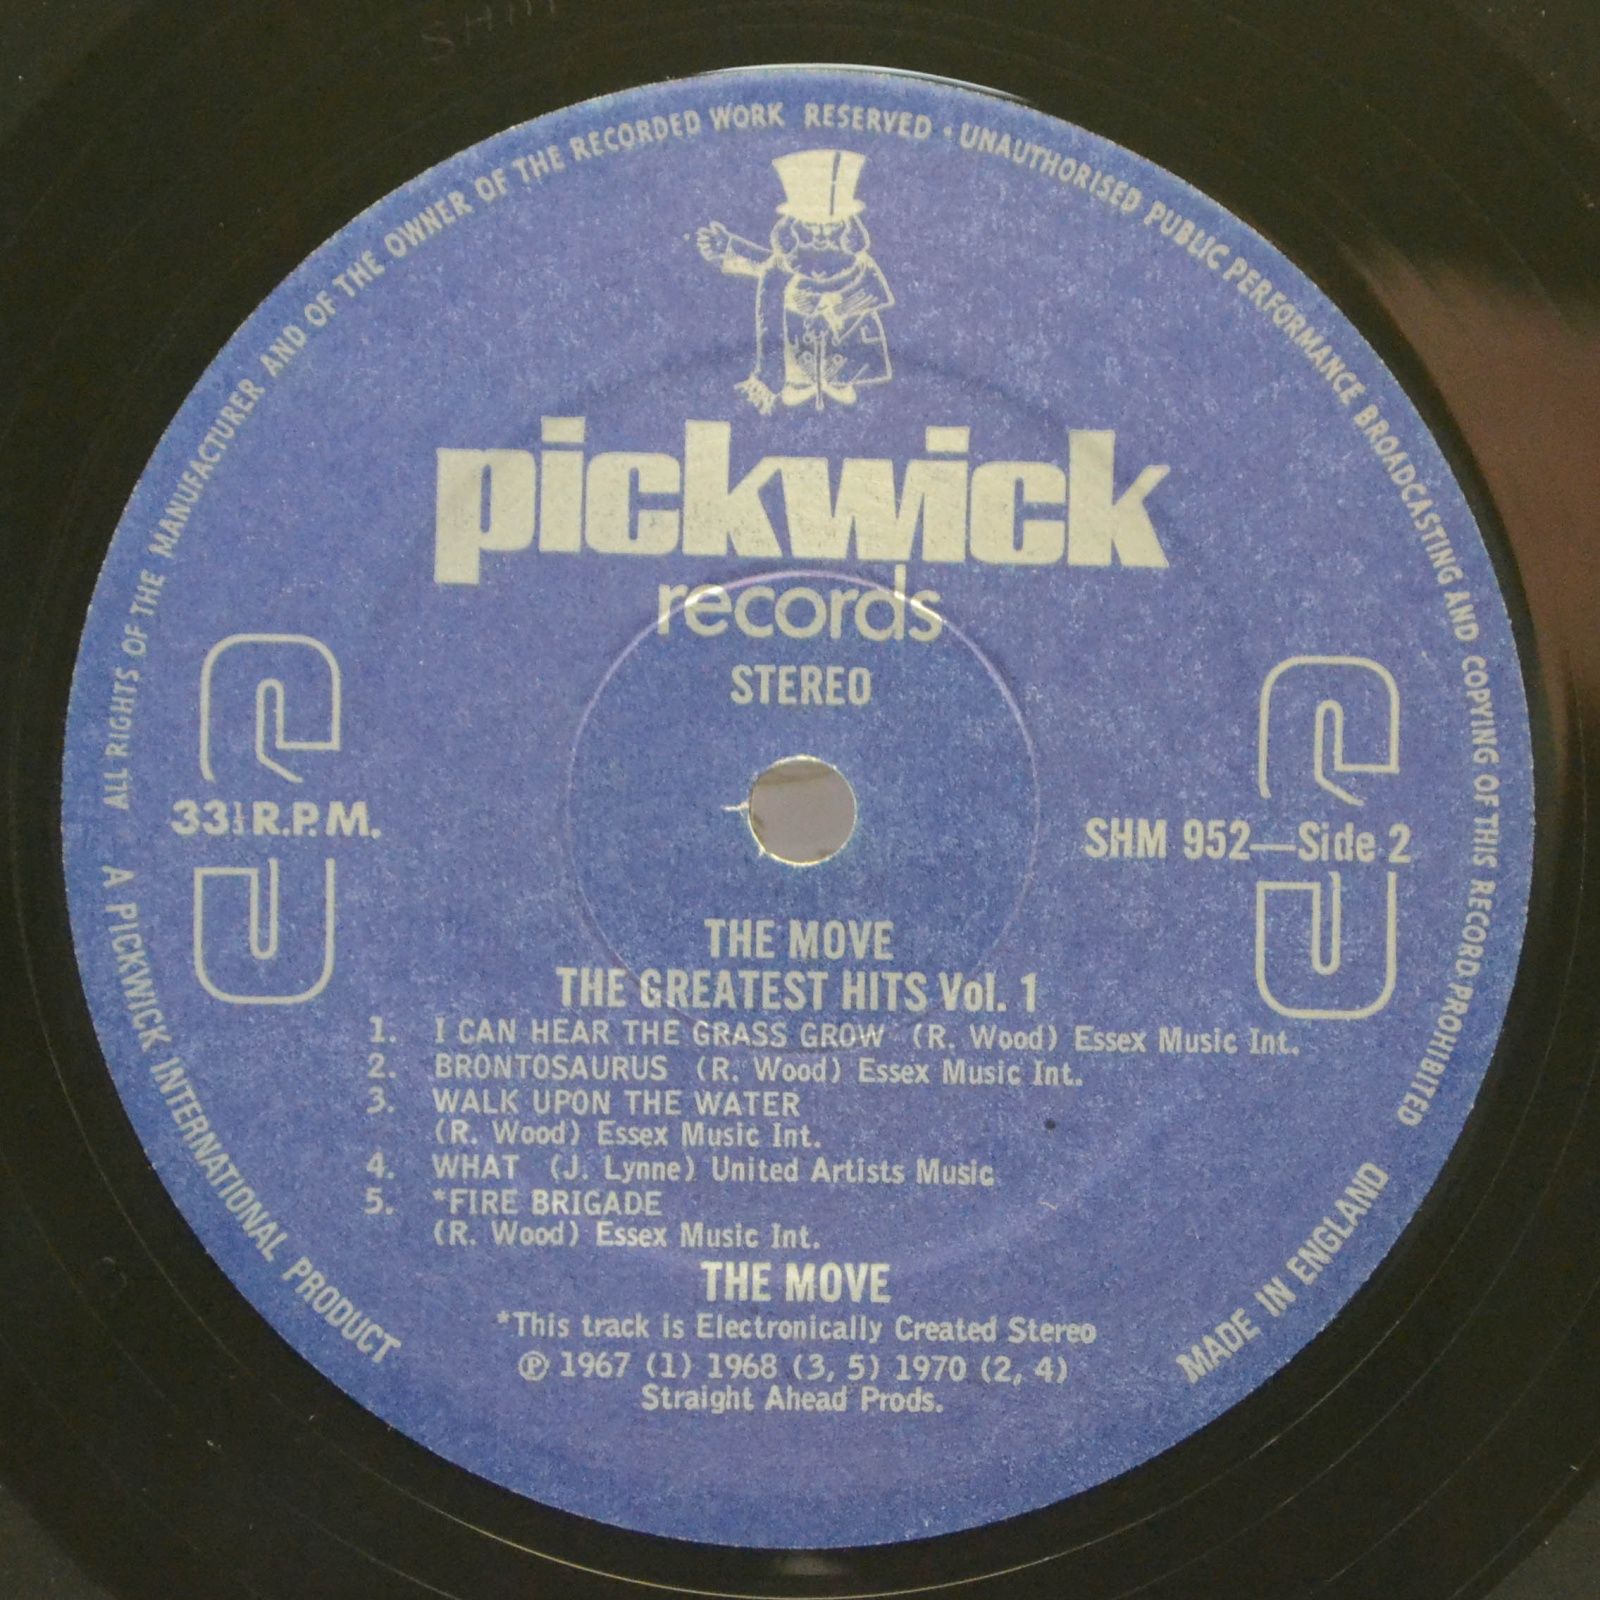 Move — The Greatest Hits Vol. 1 (UK), 1978